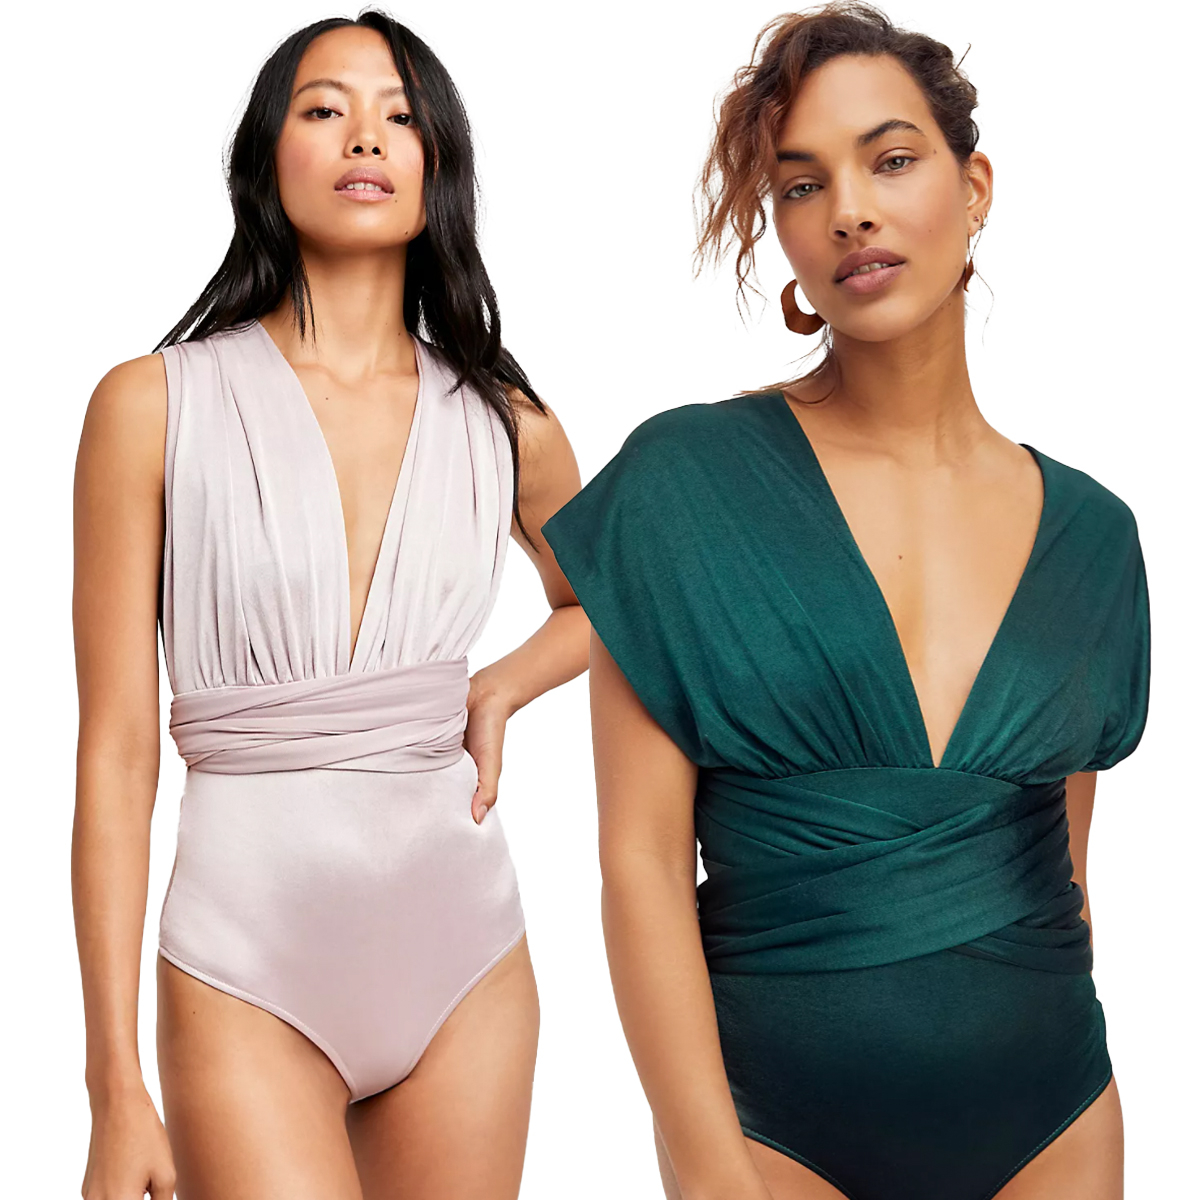 Five Styles for the 100 Ways Convertible Bodysuit on Vimeo